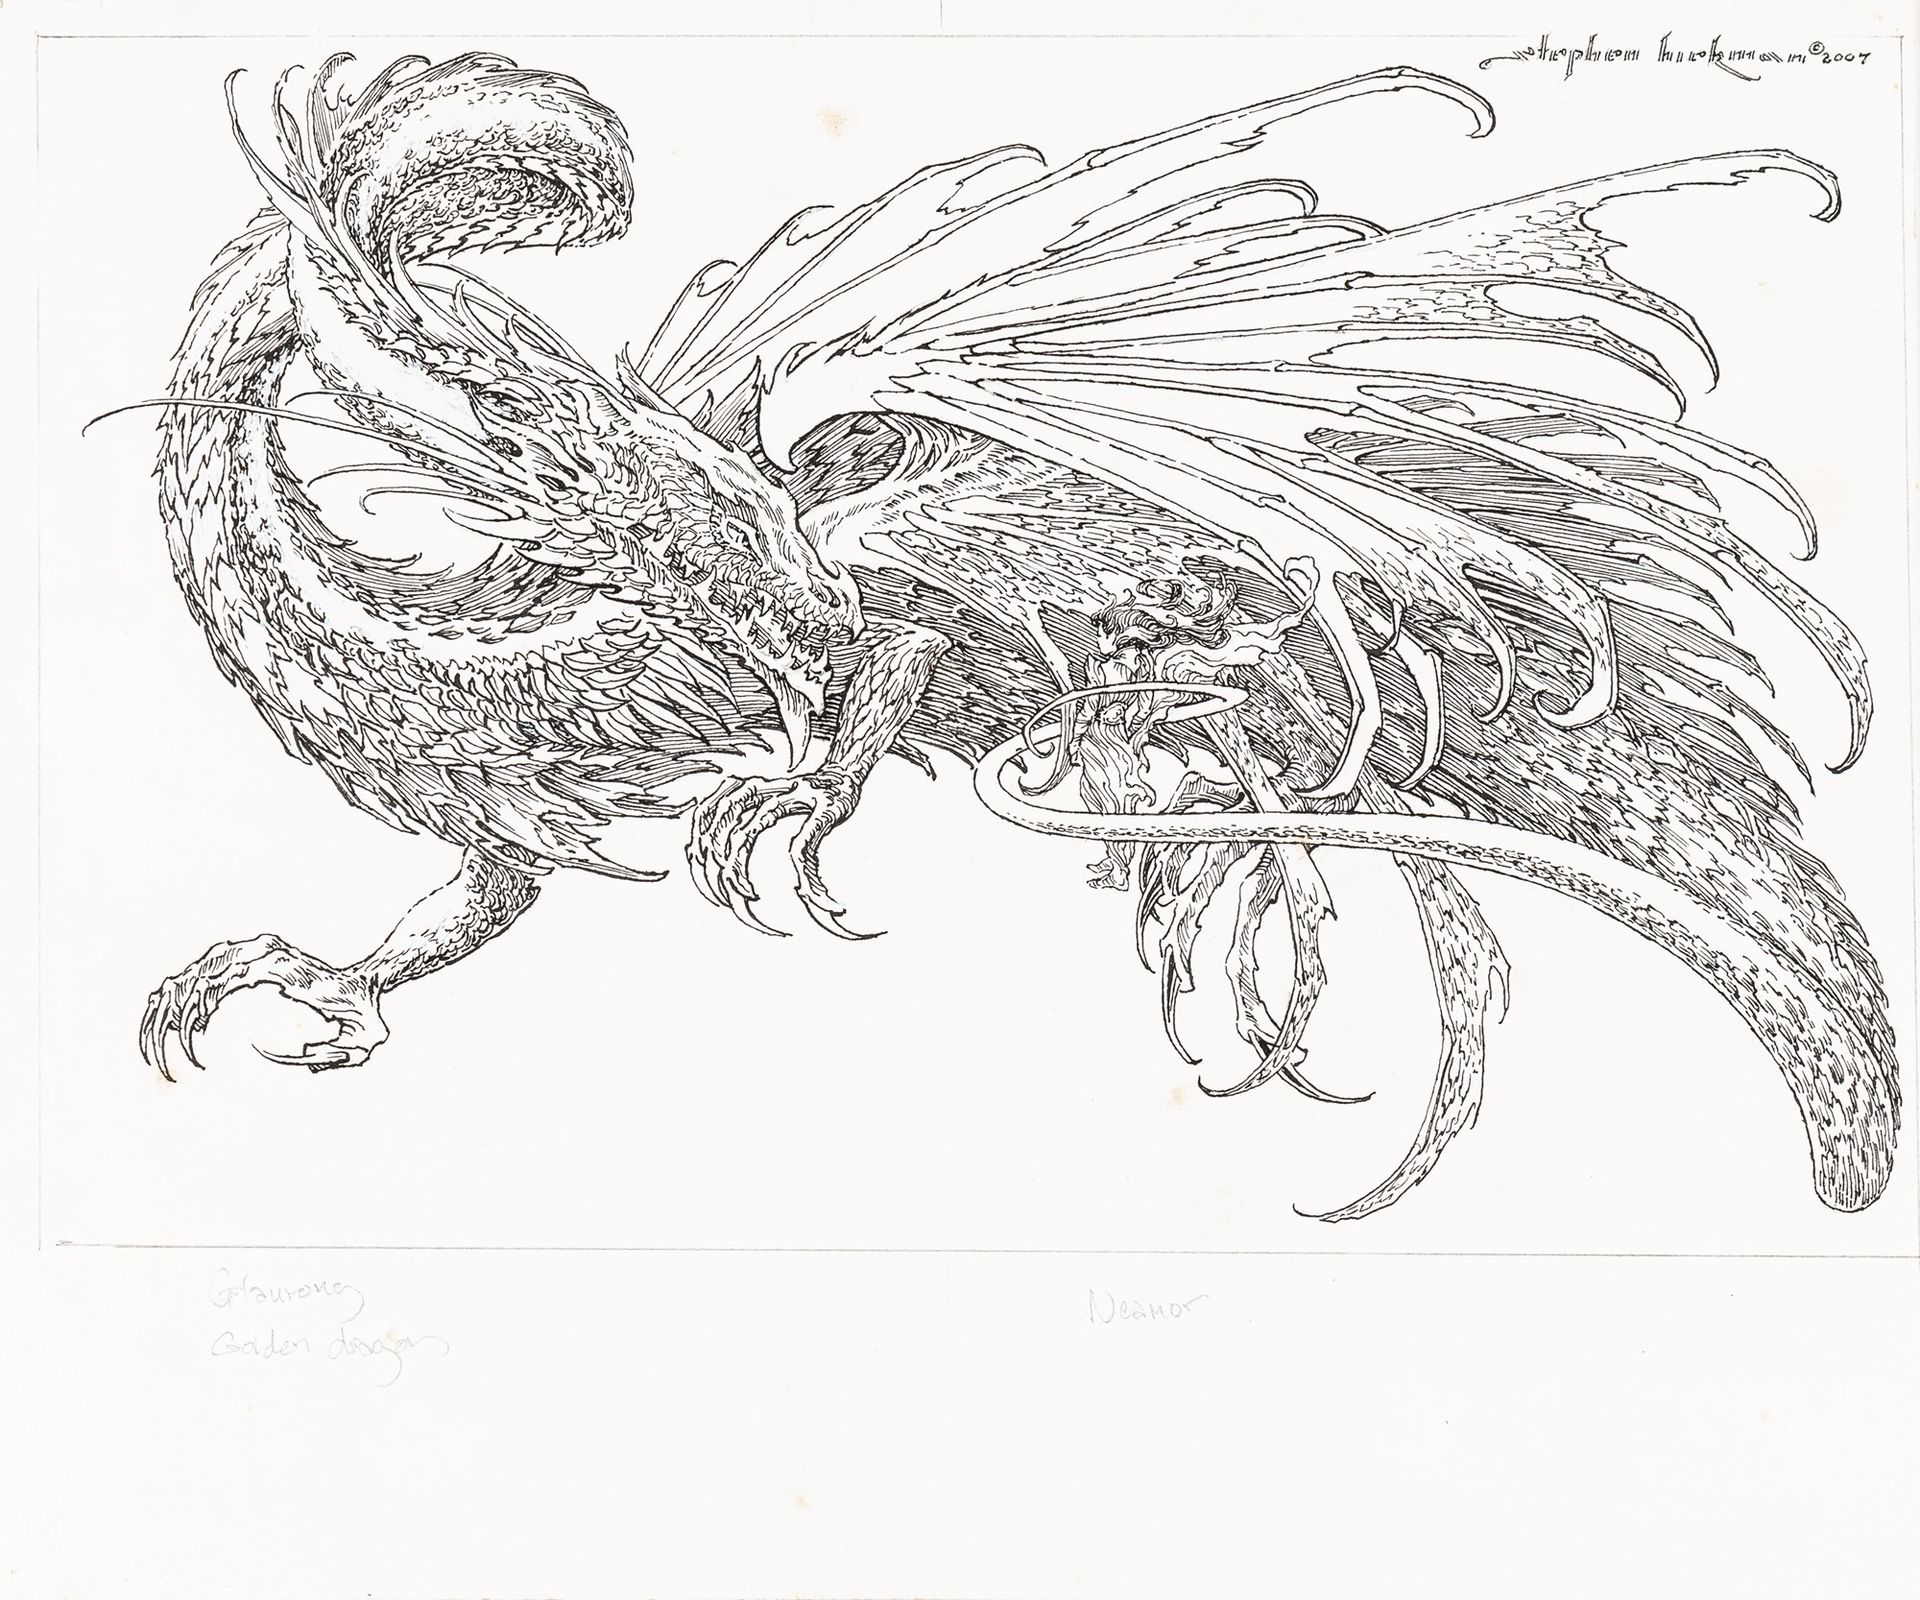 Stephen Hickman Glaurung, 2007

pencil and ink on thin cardboard
30 x 24,5 cm
Or&hellip;